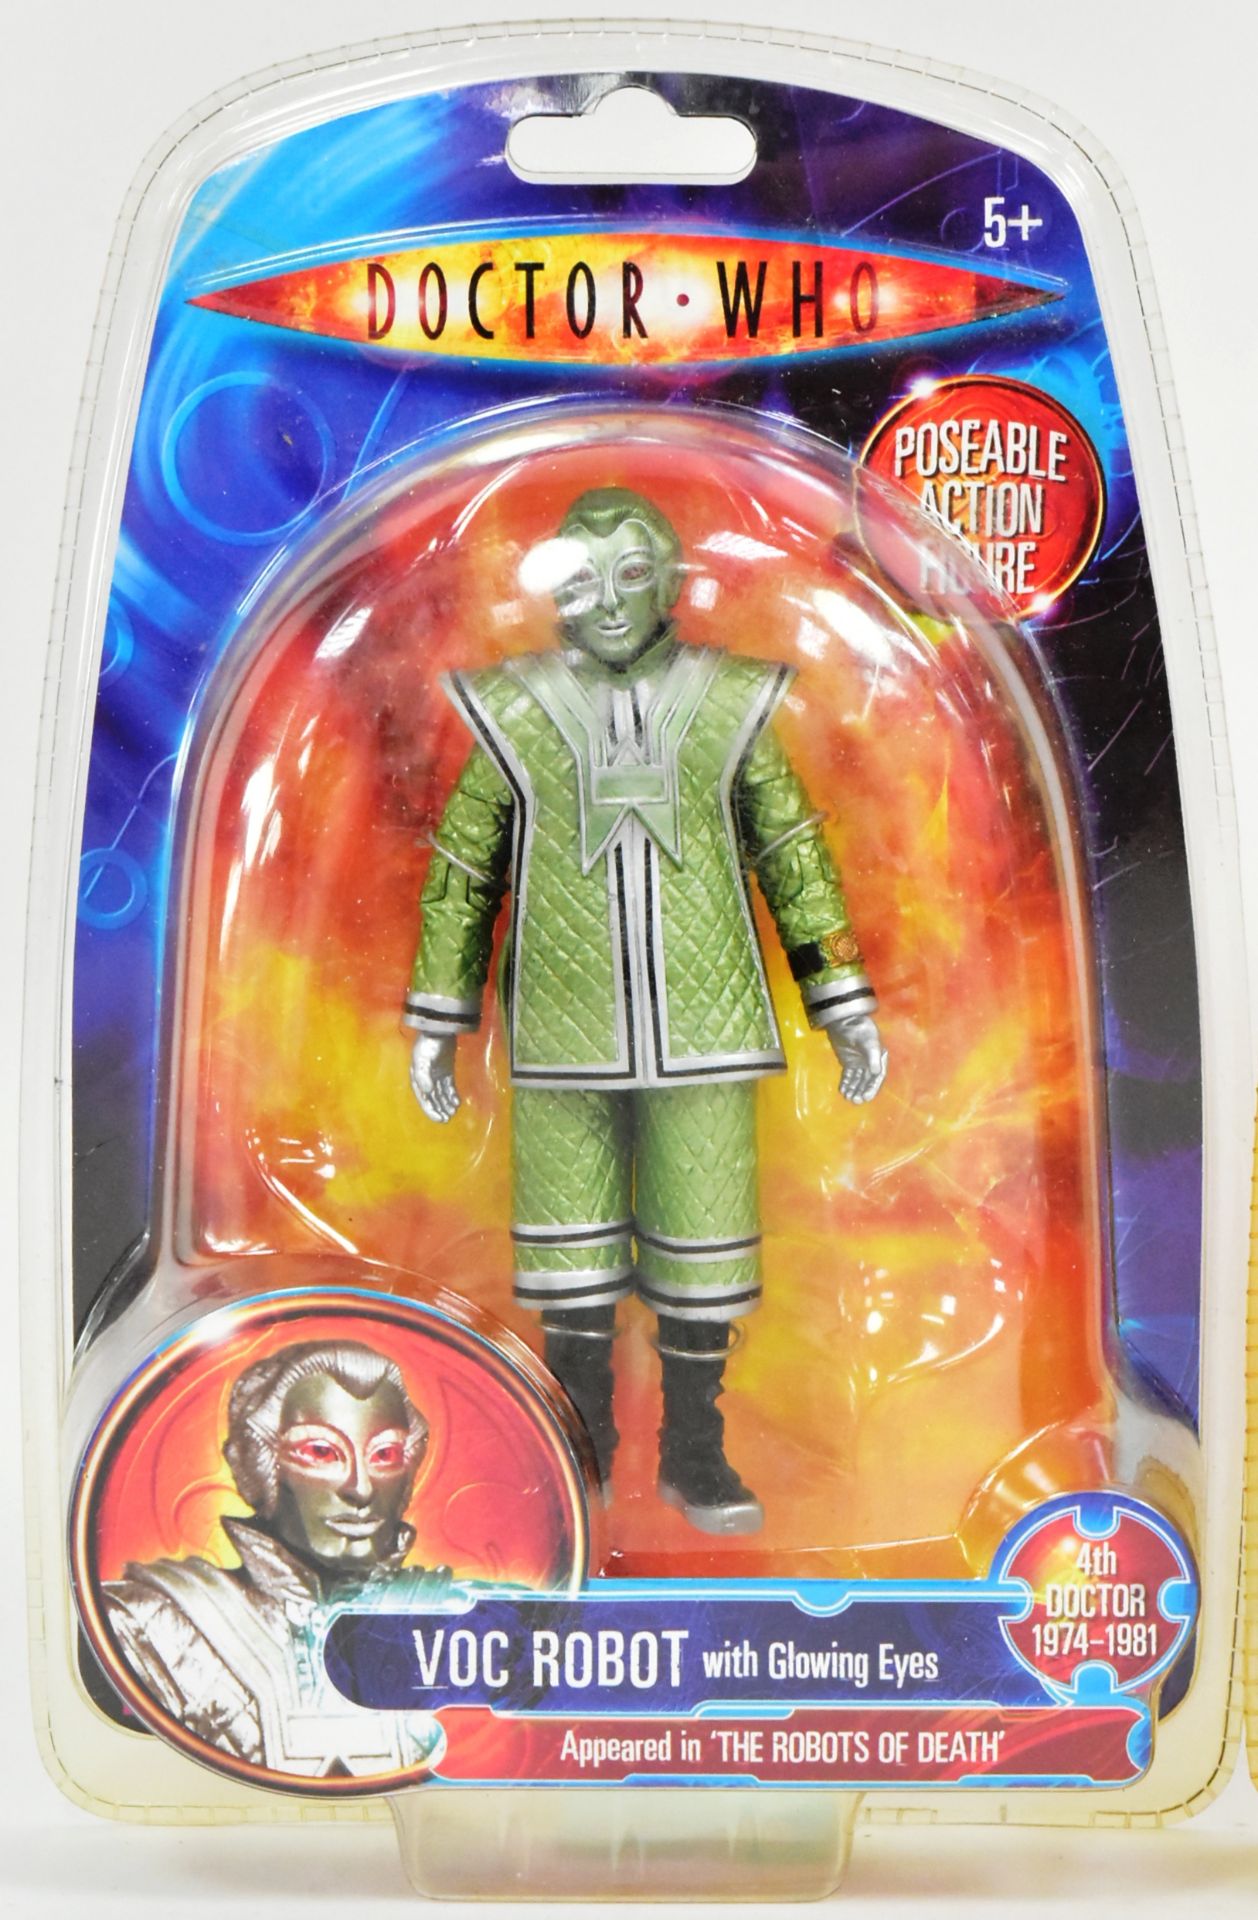 DOCTOR WHO - CHARACTER OPTIONS - VOC ROBOT ACTION FIGURES - Image 2 of 5